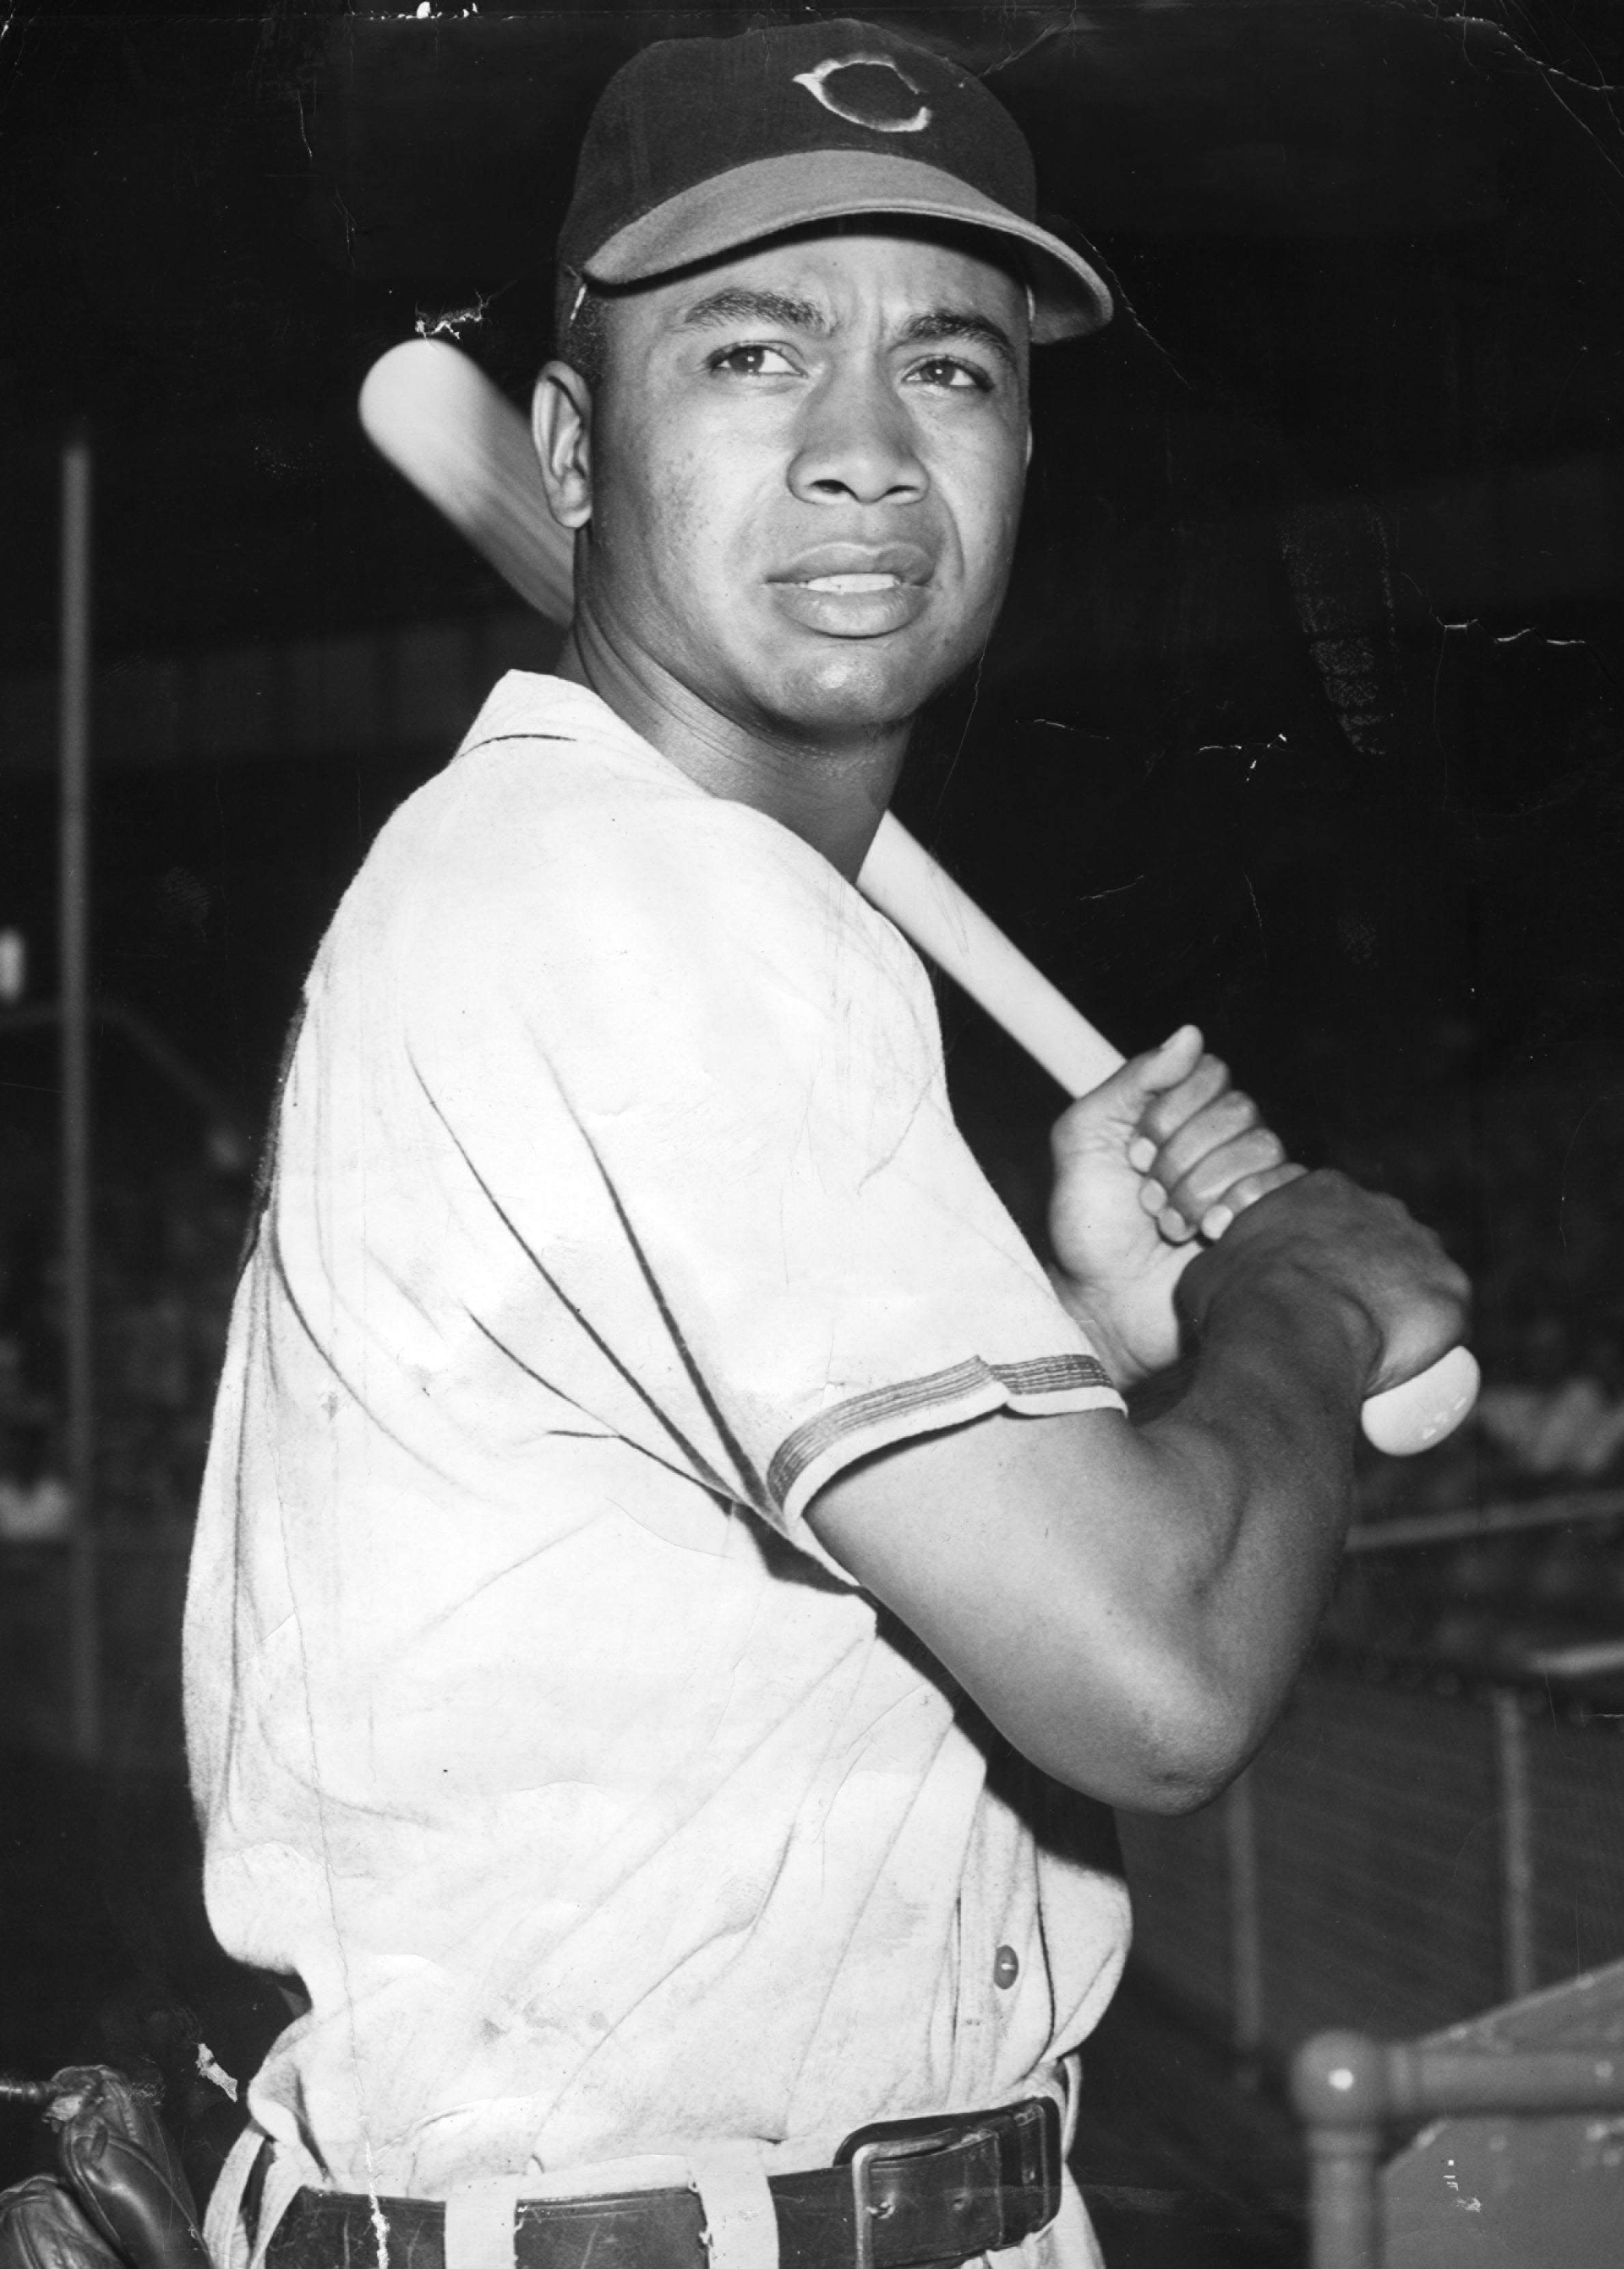 Tim Scott on X: Larry Doby was an American hero. ✓Served his country  during WWII ✓1st Black American to play 🏀 in ABL (pre-NBA) ✓Led his team  to a 1946 Negro League